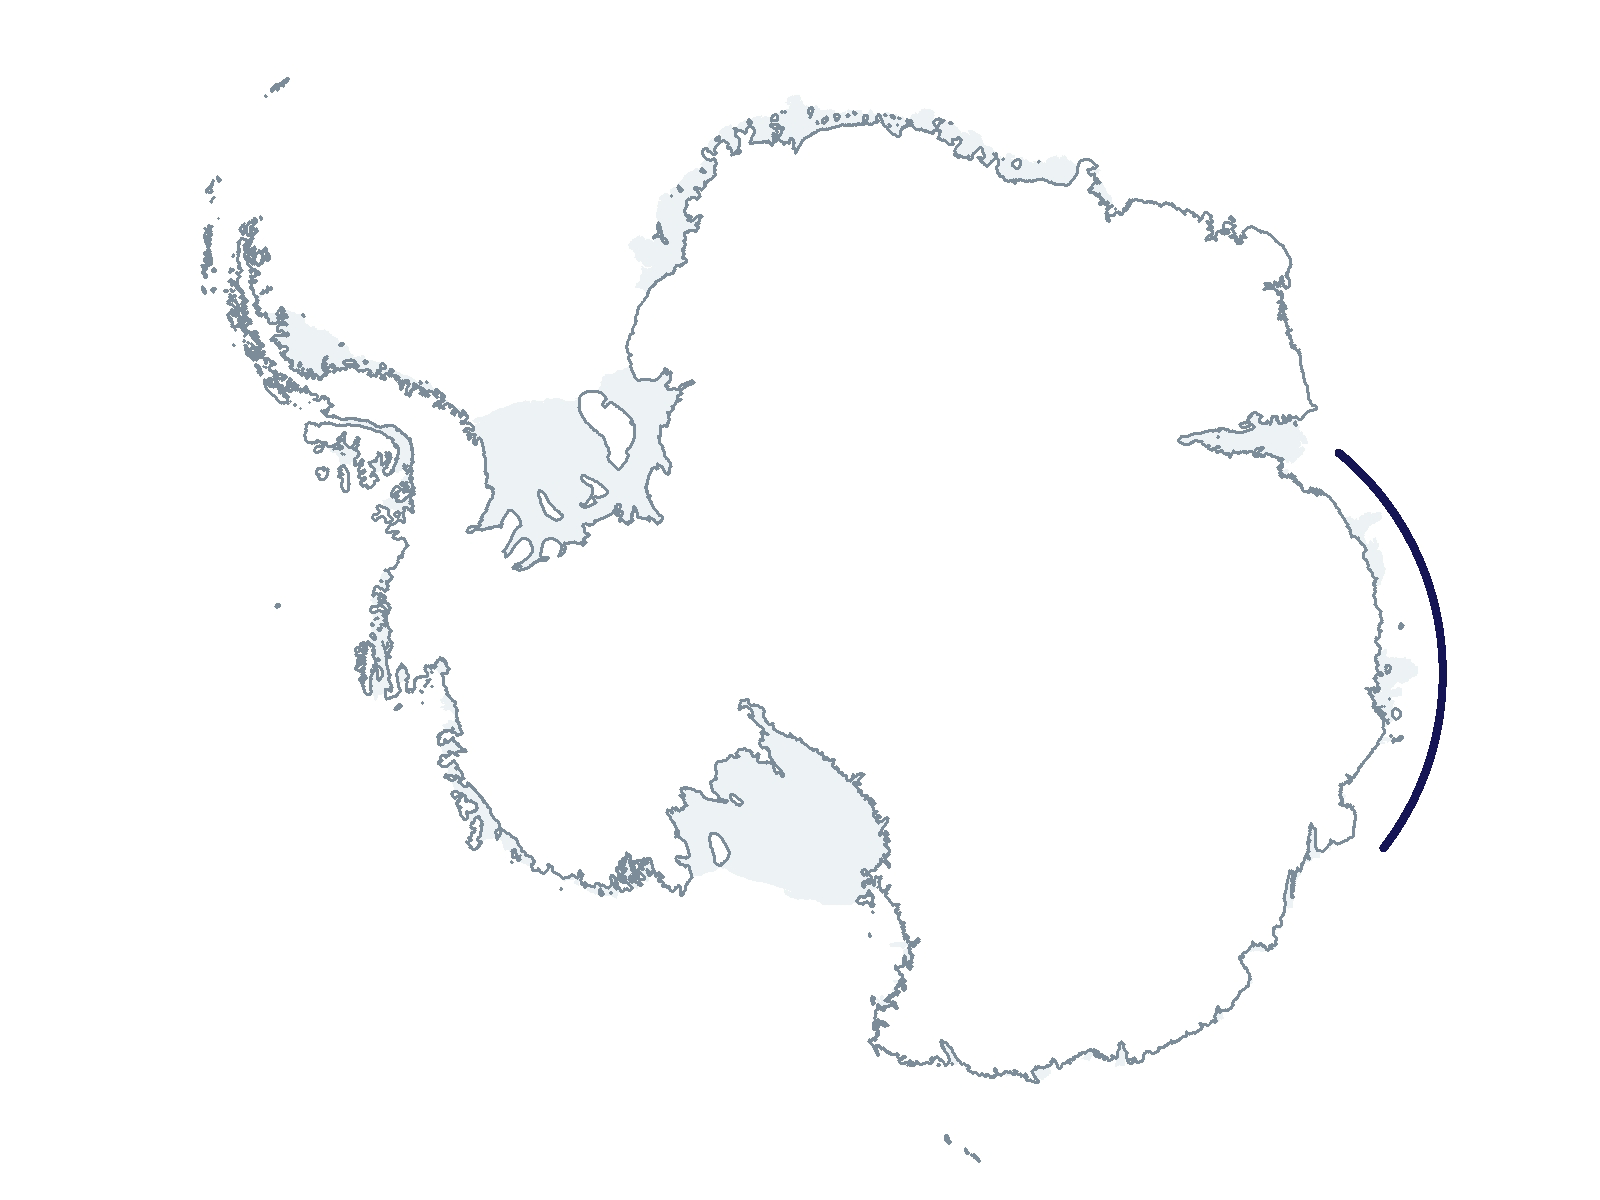 B-014-N Research Location(s): East Antarctica